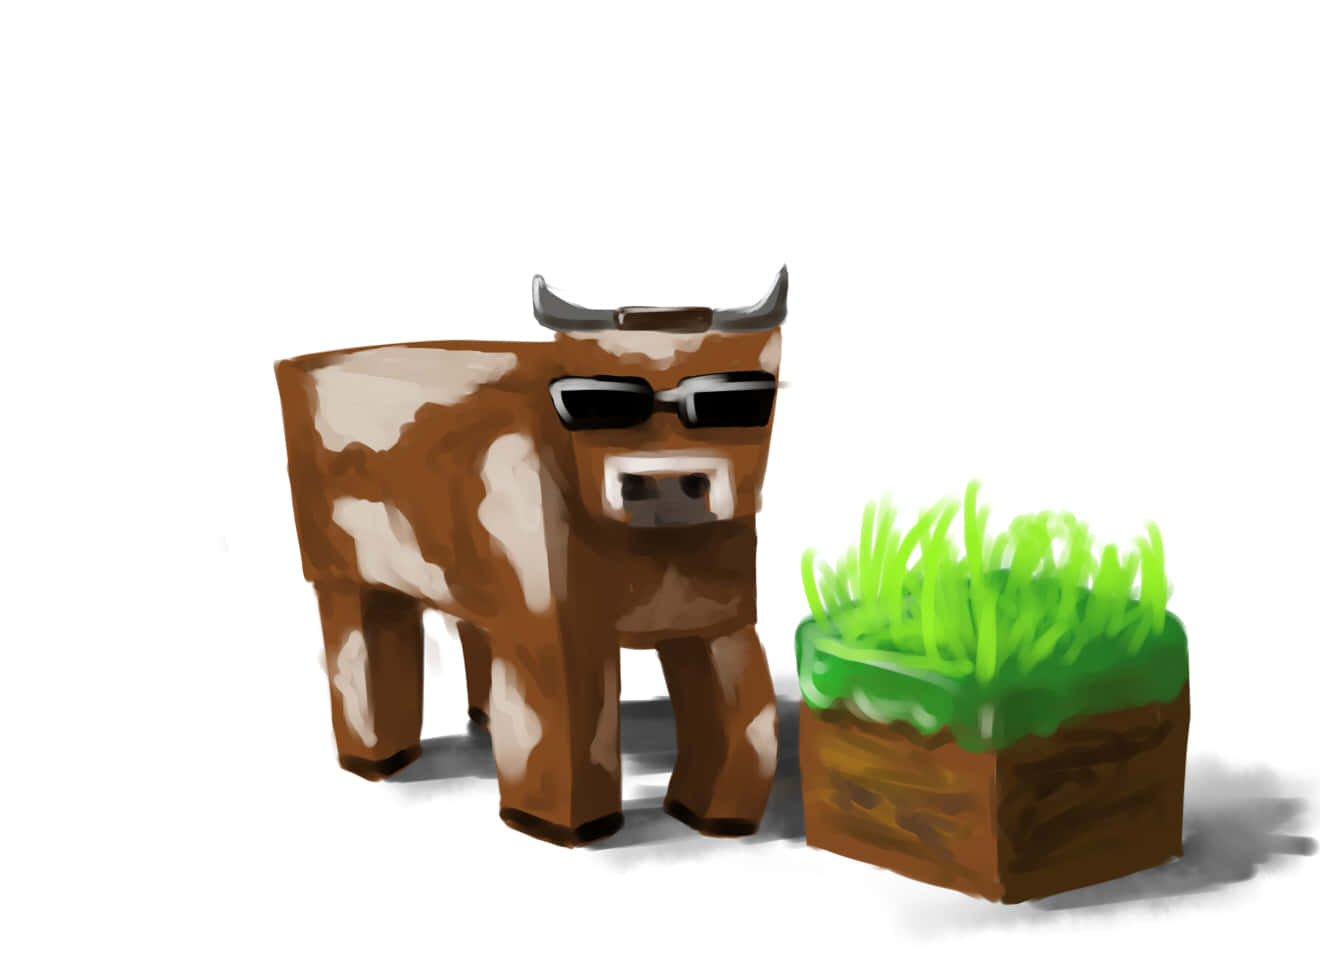 A Minecraft Cow peacefully grazing in a lush, pixelated world Wallpaper